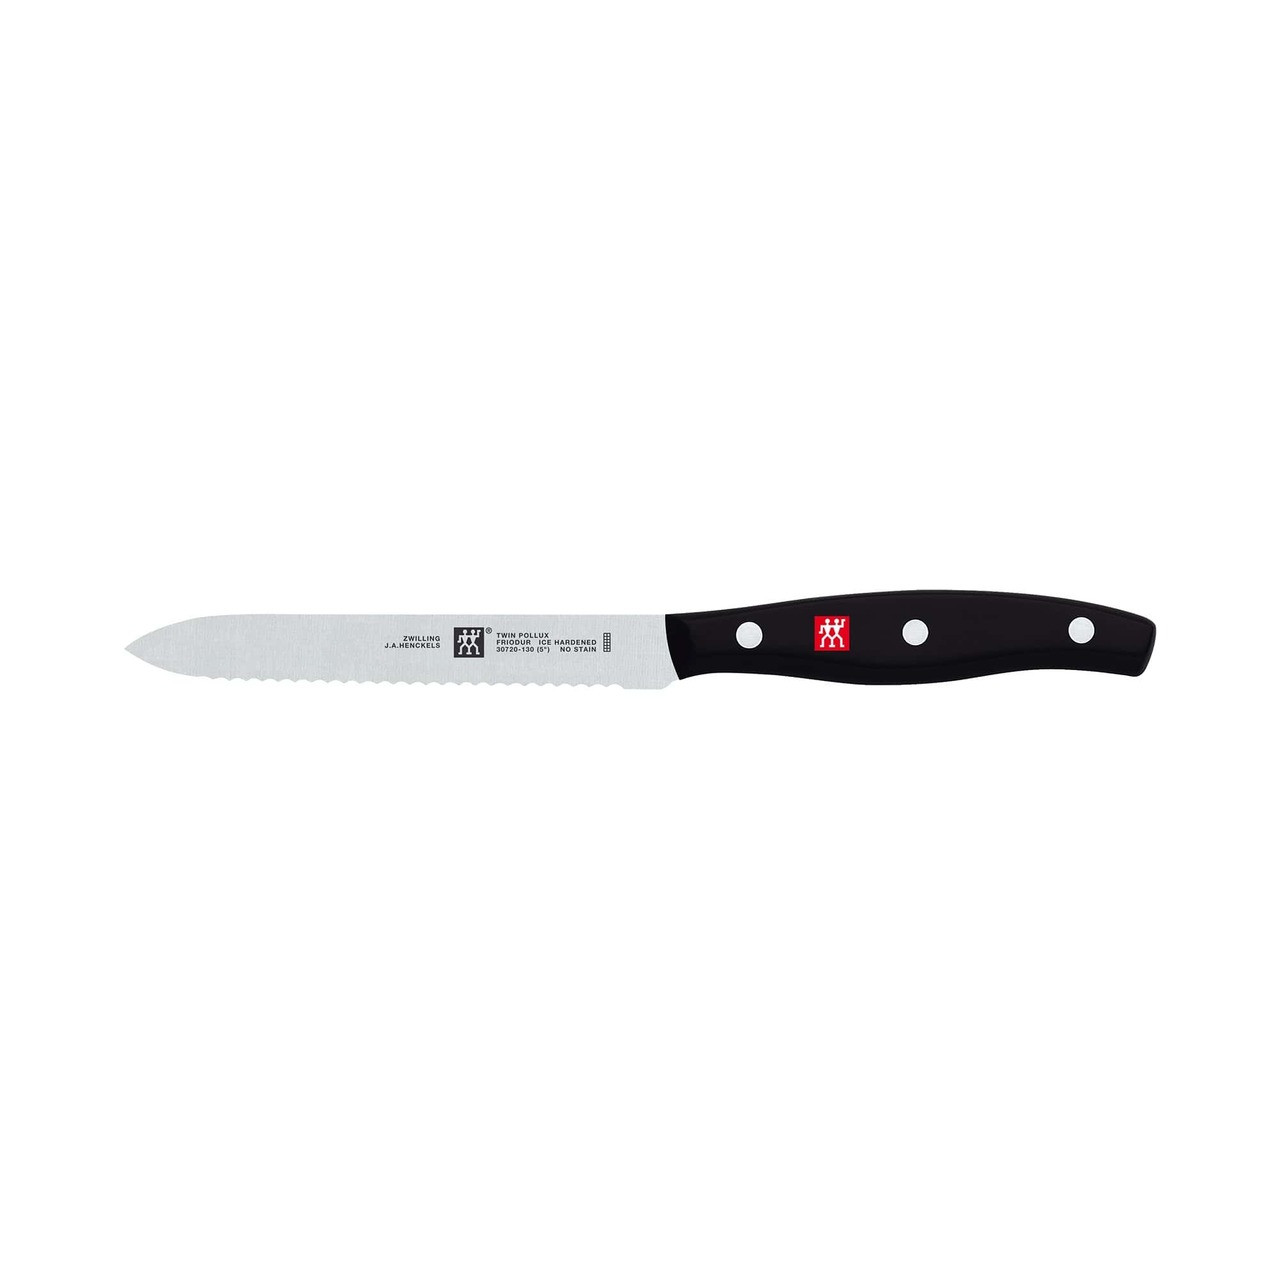 https://cdn11.bigcommerce.com/s-hccytny0od/images/stencil/1280x1280/products/643/1054/zwilling-ja-henckels-twin-signature-serrated-utility-knife-5-inch__13919.1509979794.jpg?c=2?imbypass=on